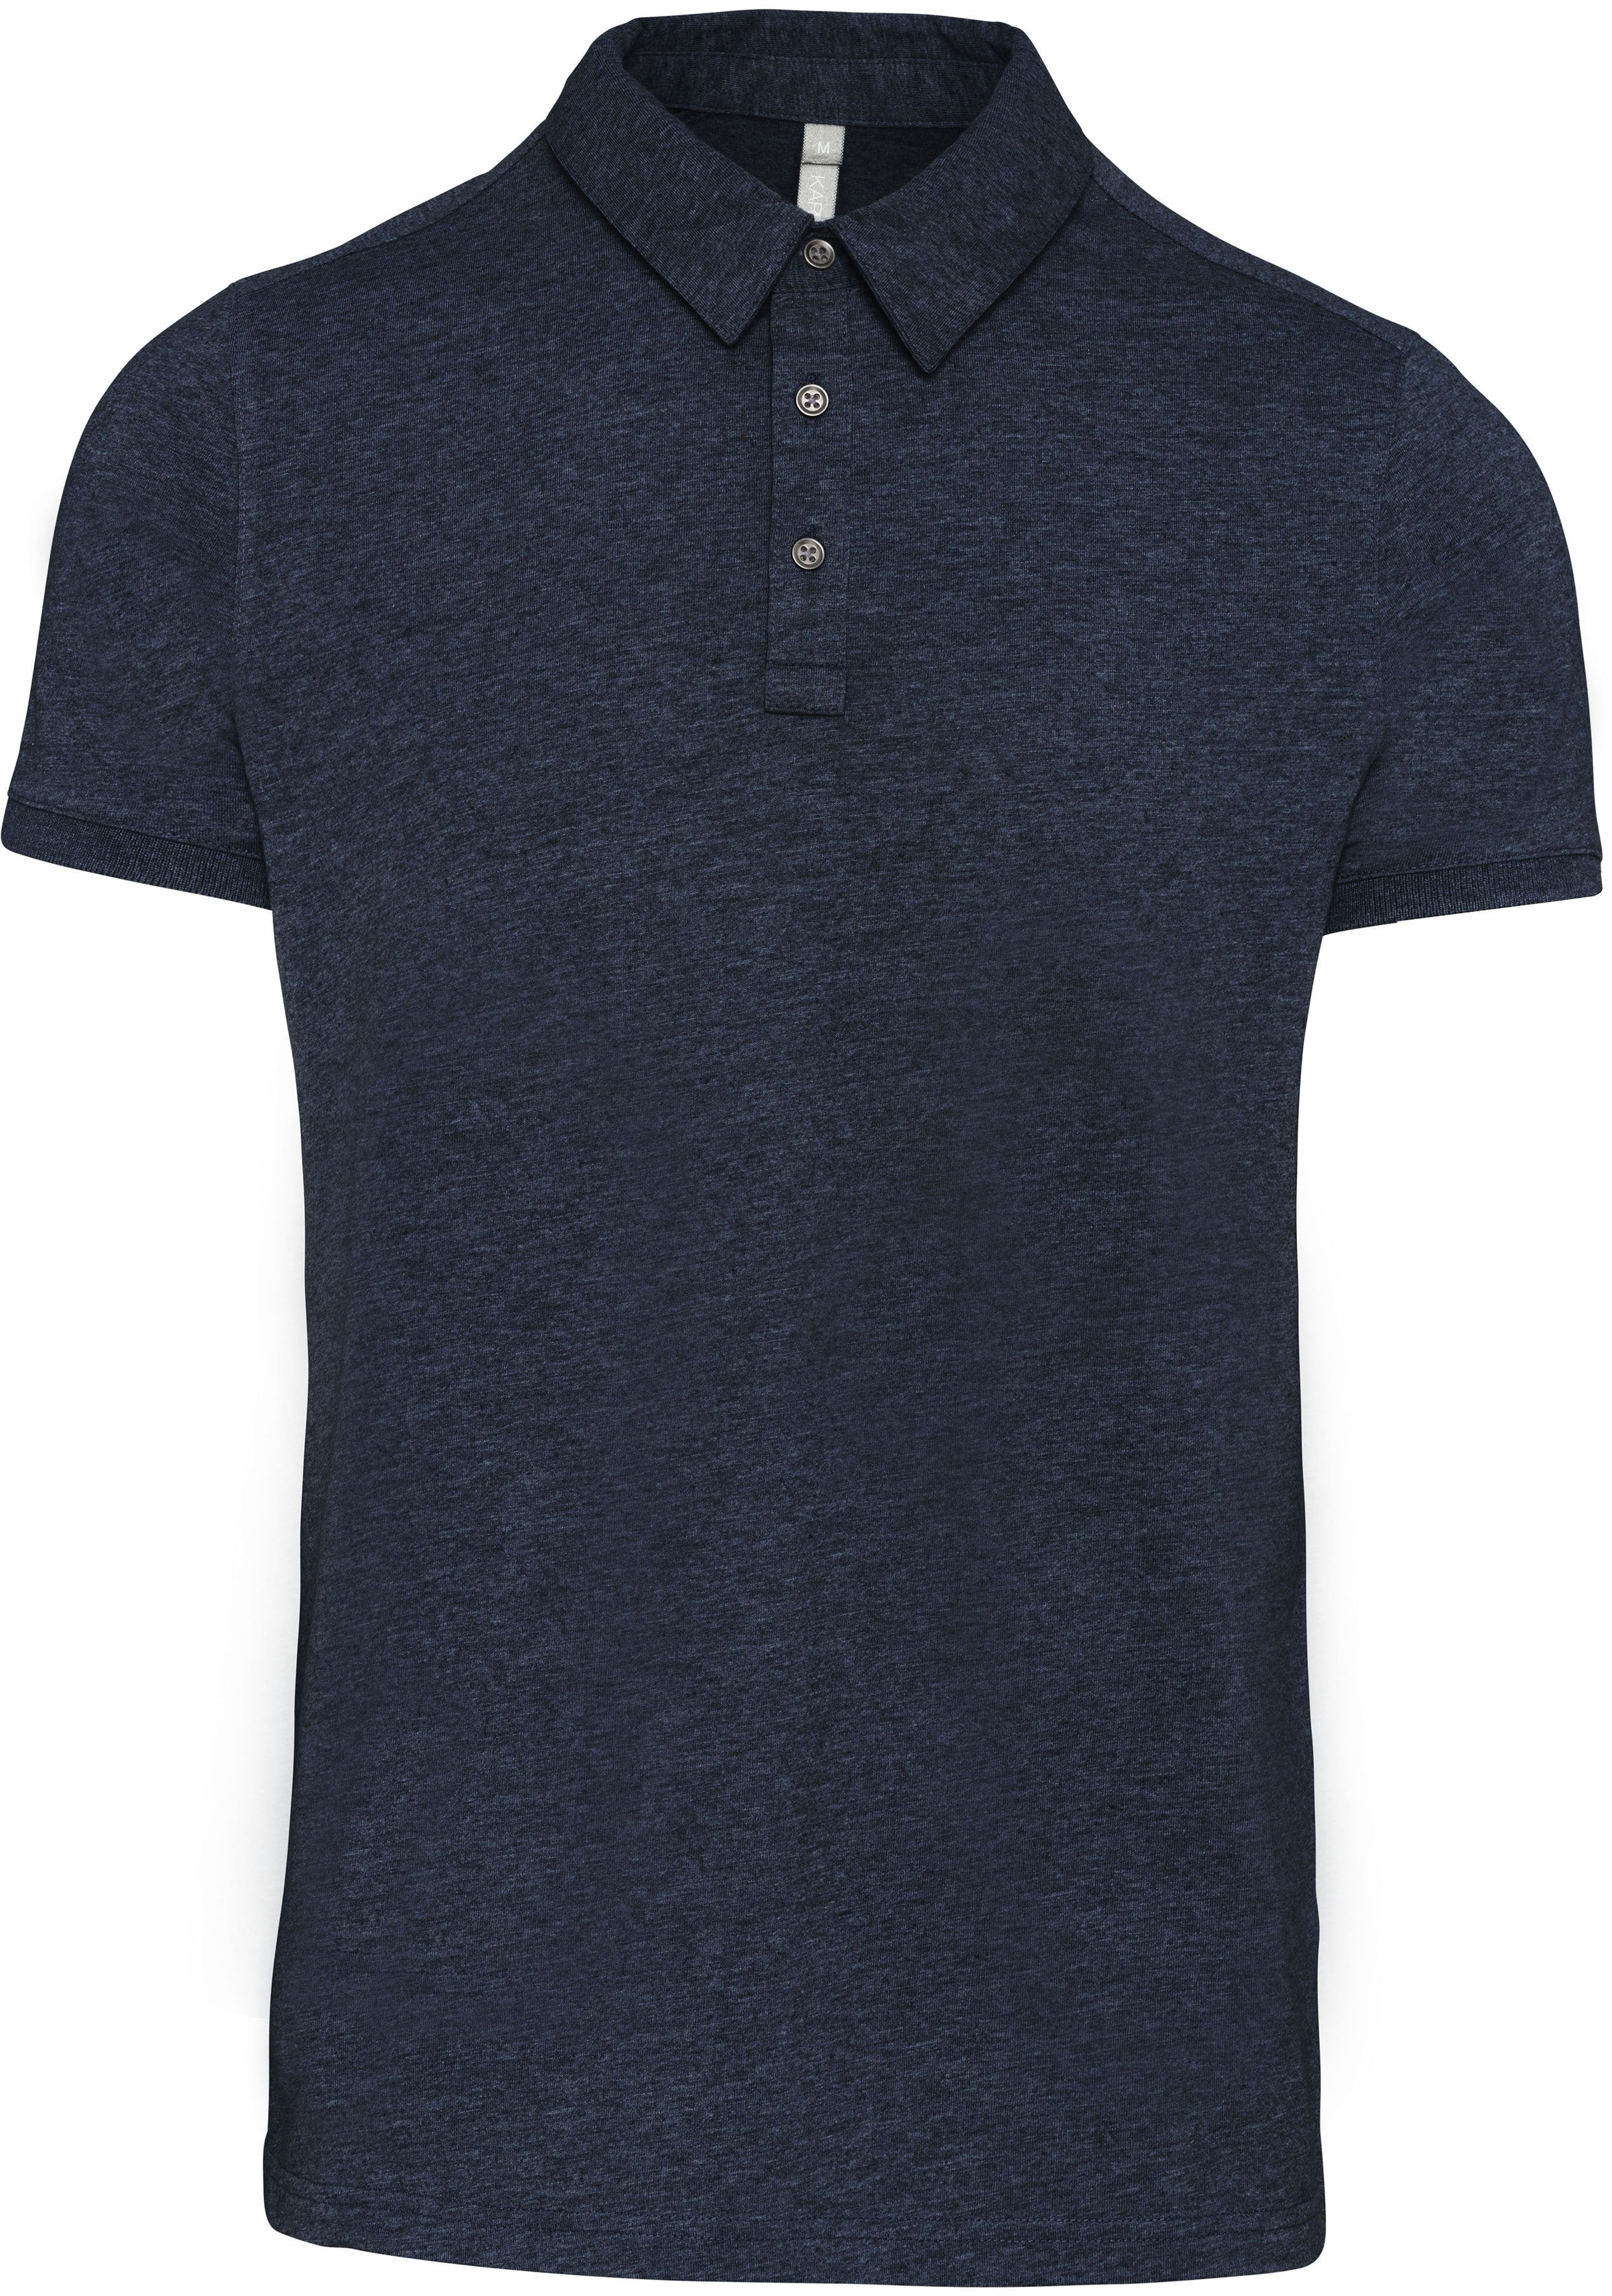 Polo personnalisé manches courtes classique golf- K262 polo homme Fruit of the Loom french navy S 